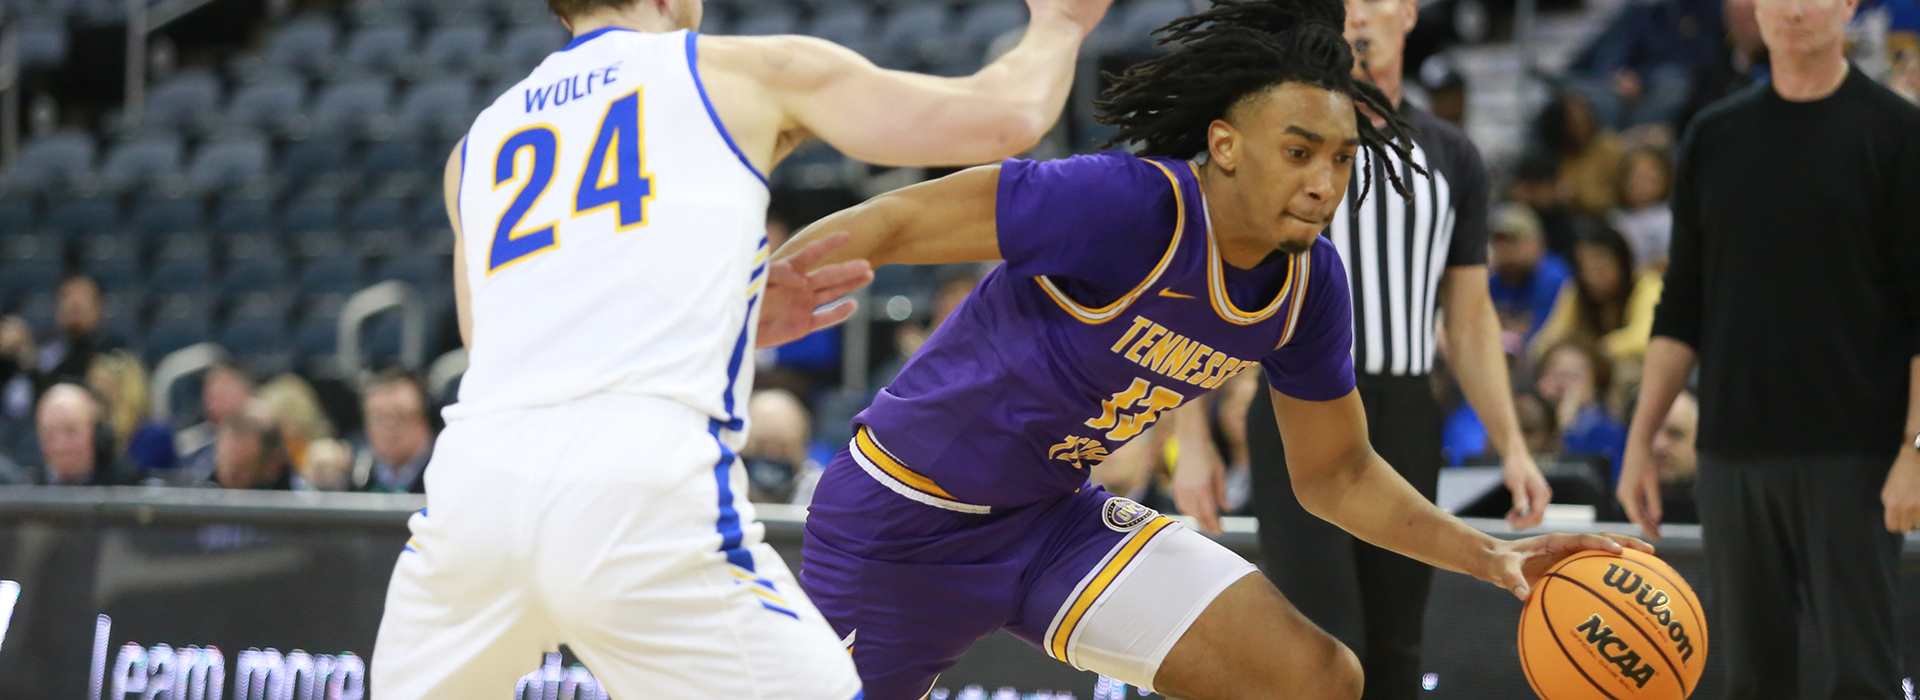 Golden Eagles fall to No. 3 Morehead State in quarterfinals of OVC Tournament